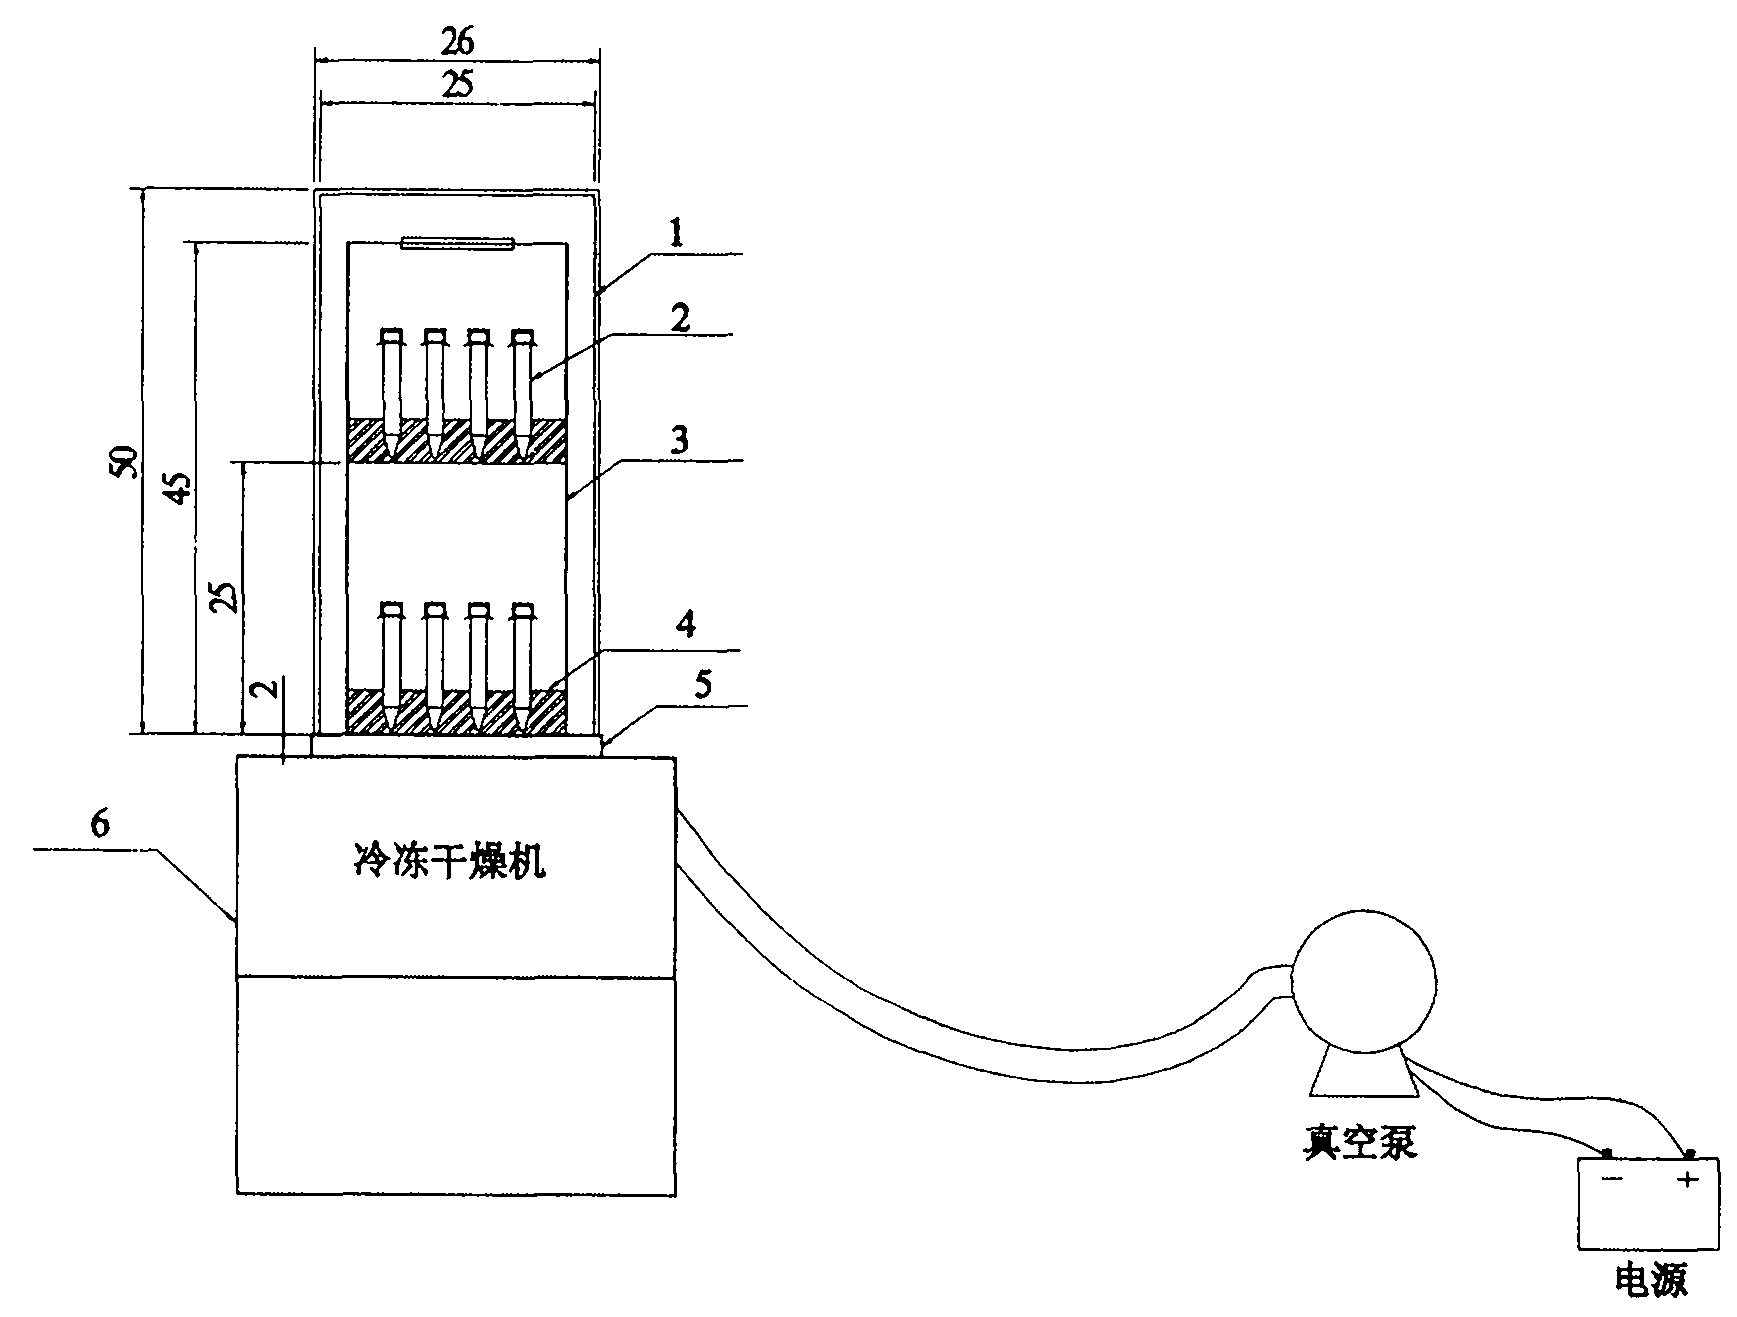 Device for concentrating extracting solution during organic phosphorus analysis in deposit sediments